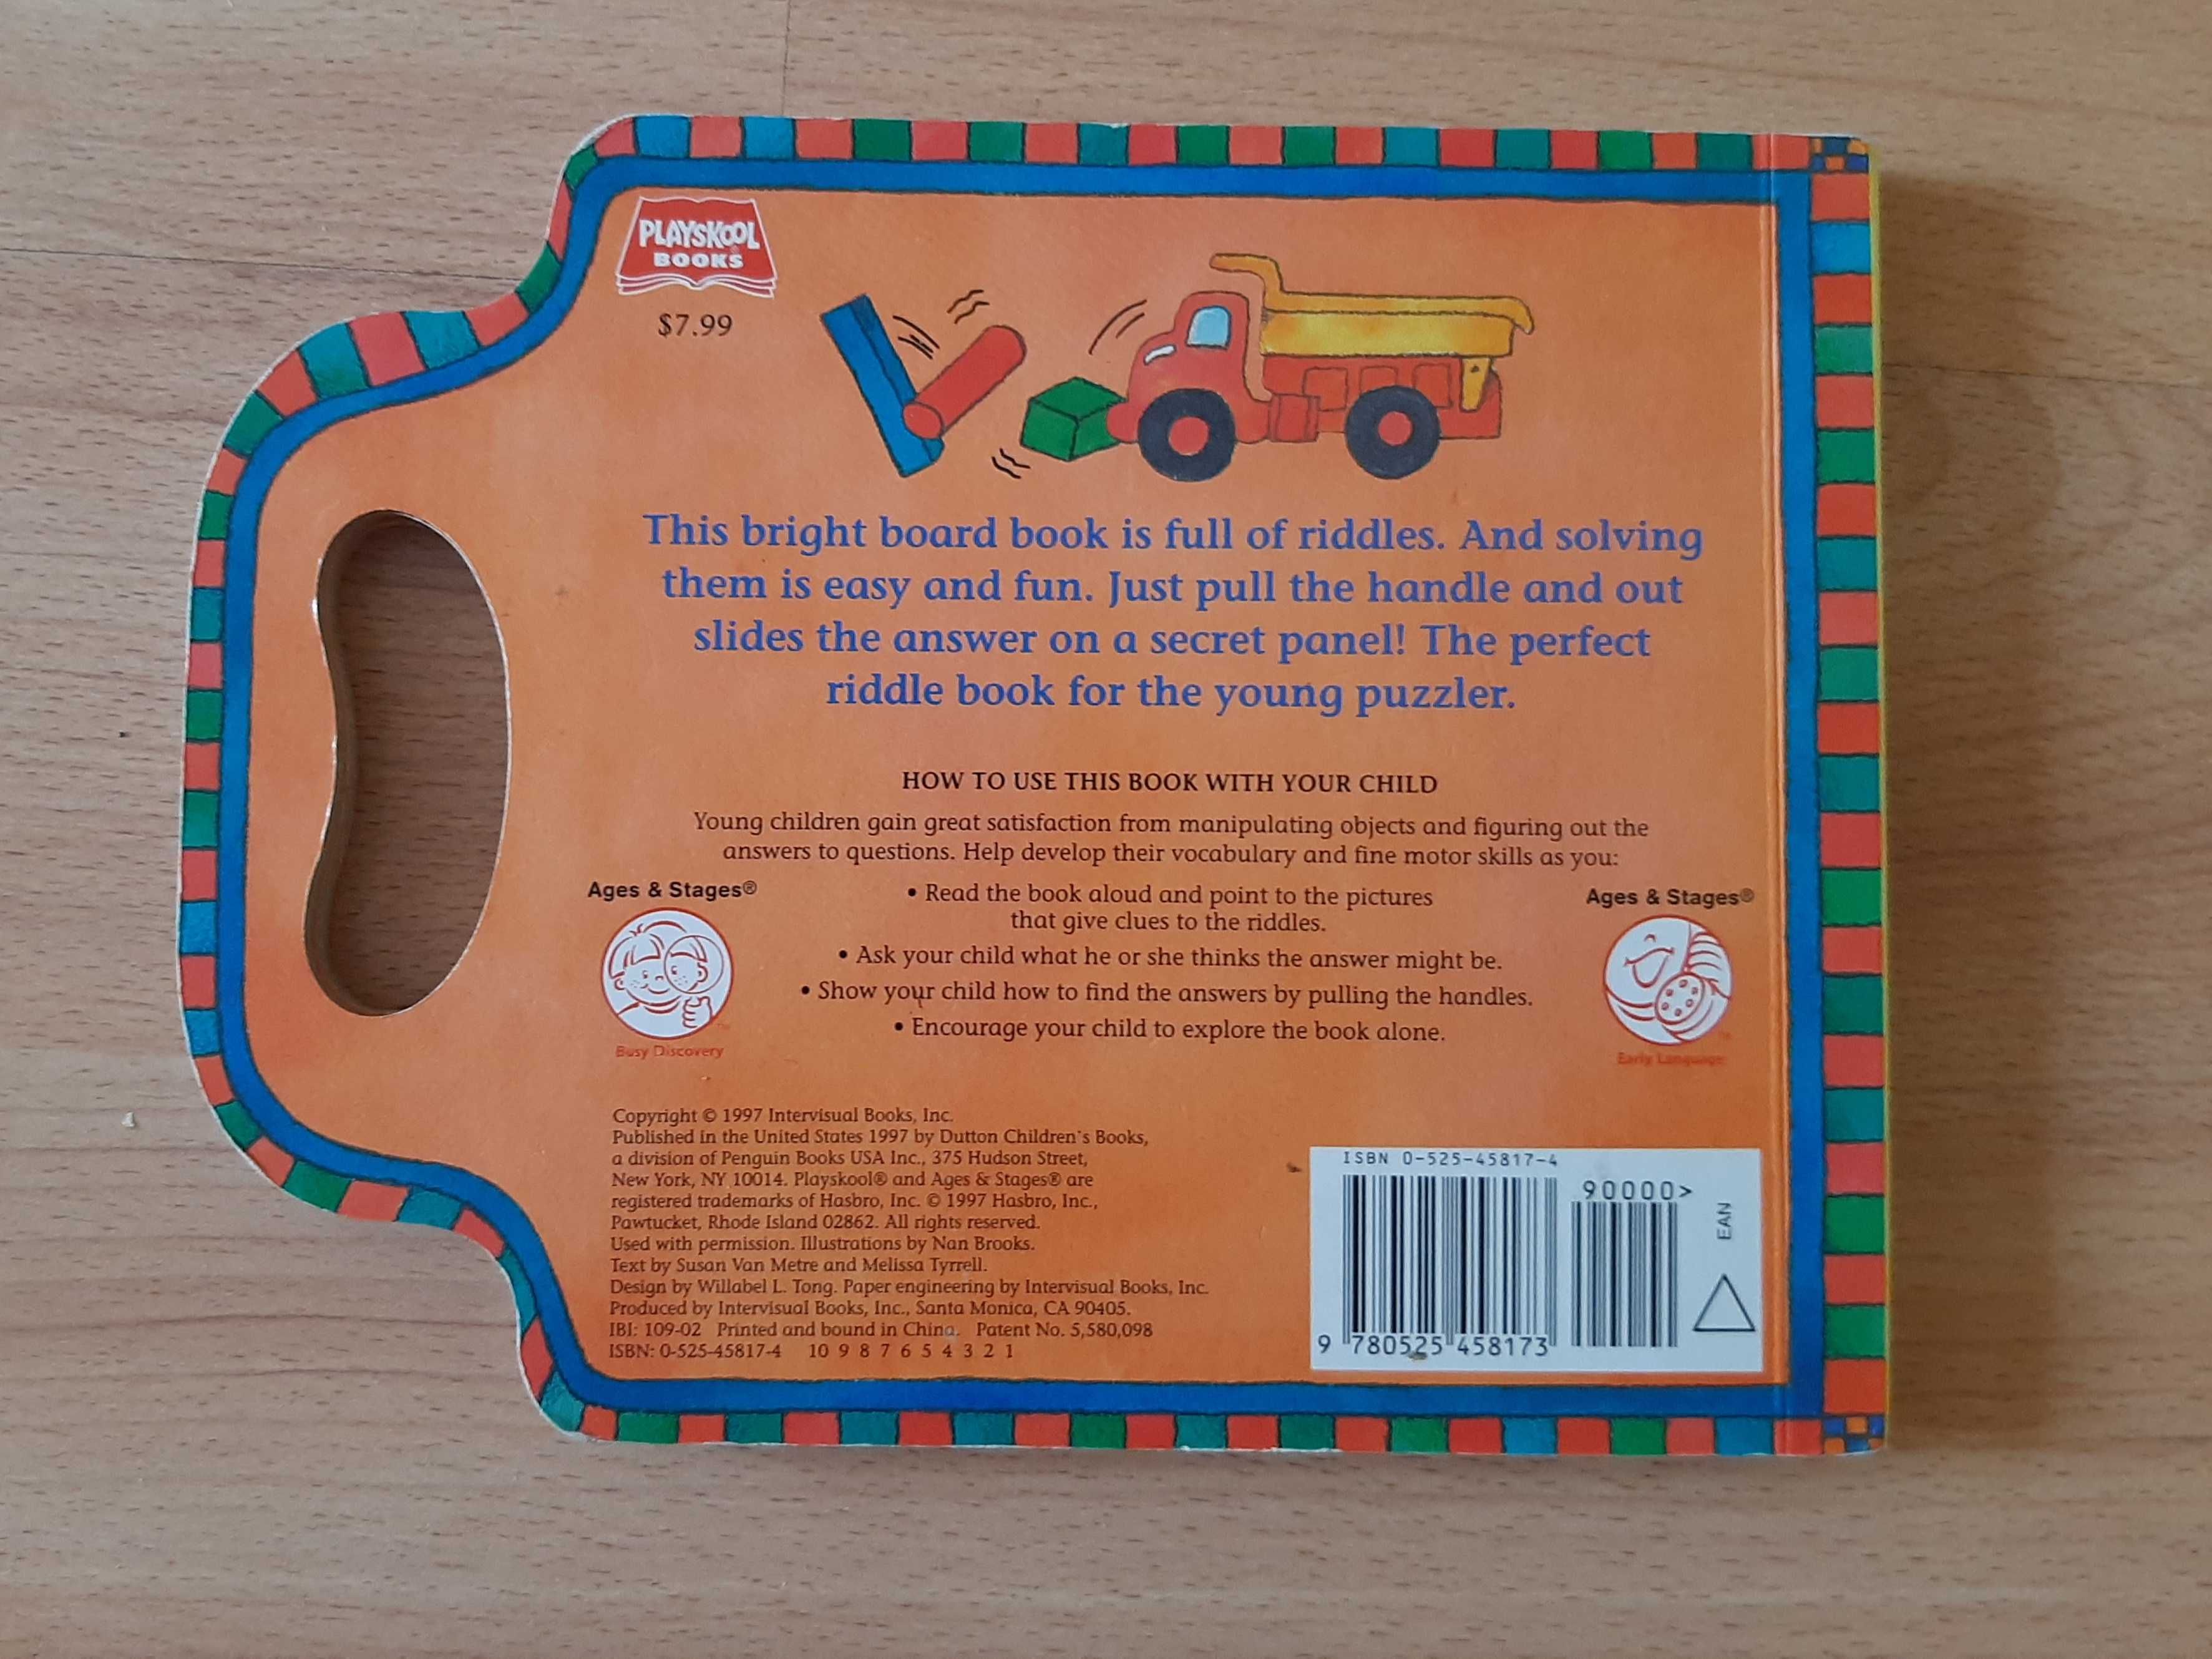 Tell Me a Toy Riddle: Slide-and-Peek Book (Playskool)